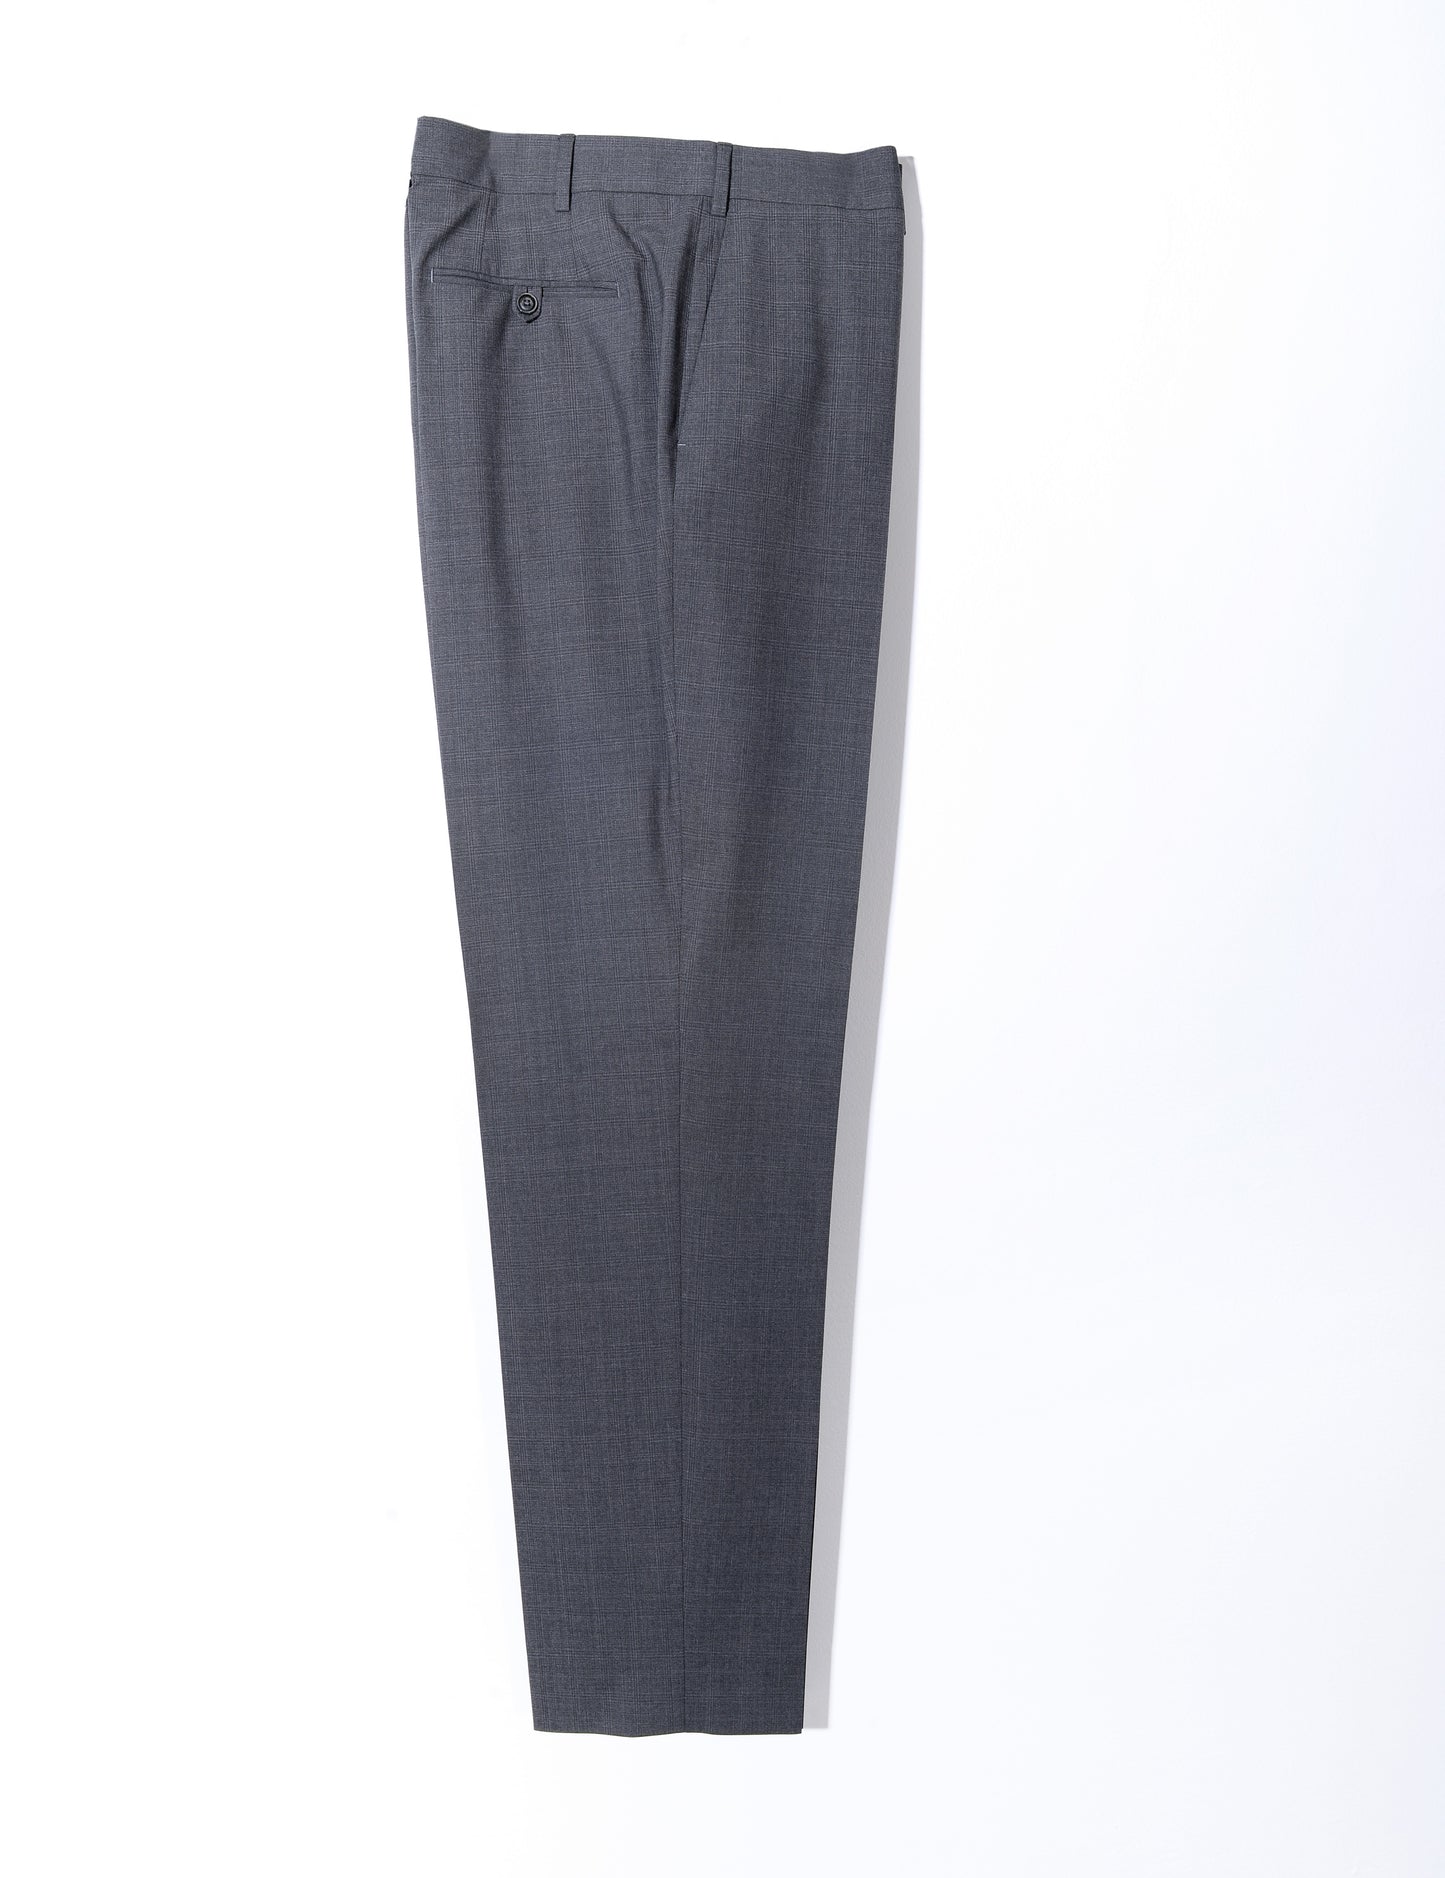 BKT50 Tailored Trousers in Tropical Wool - Gray Plaid